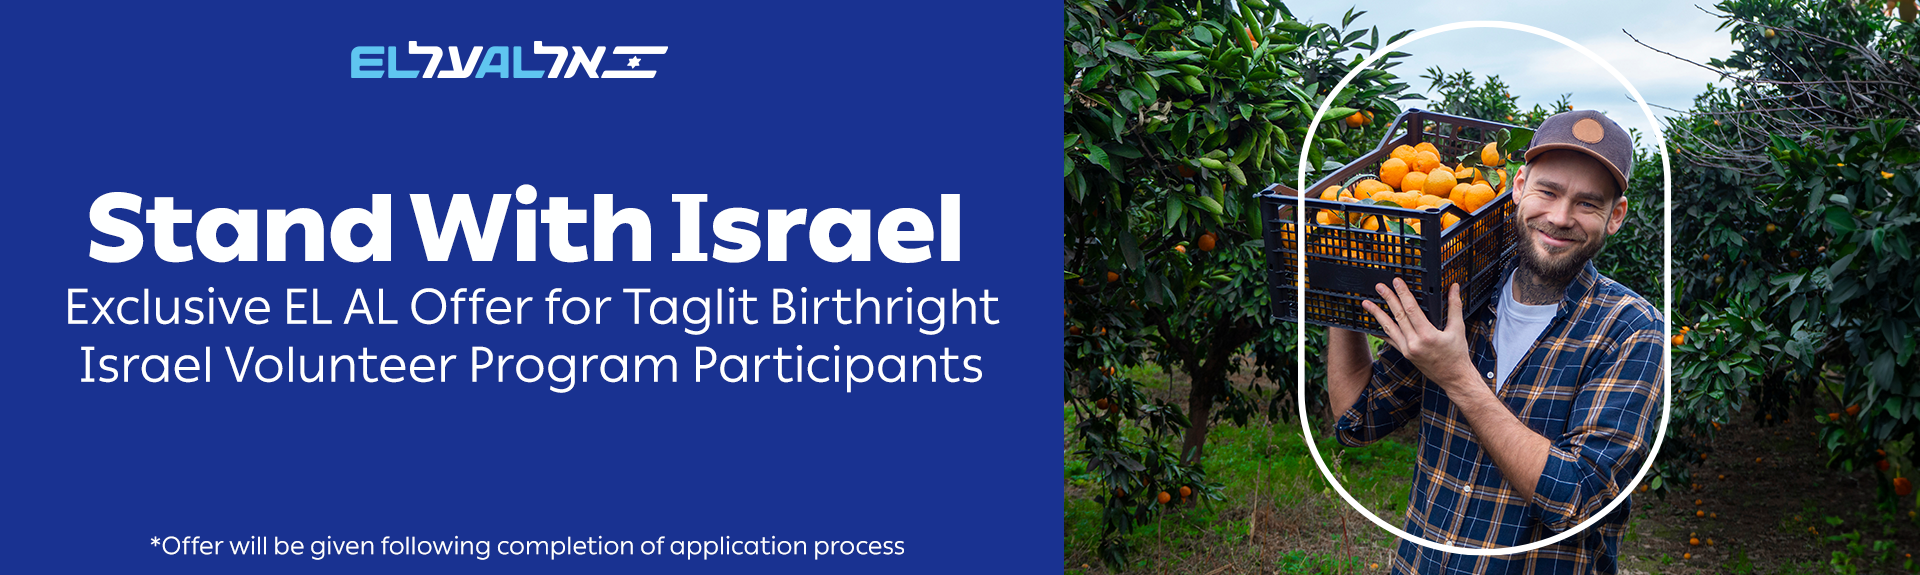 Birthright Israel on the App Store